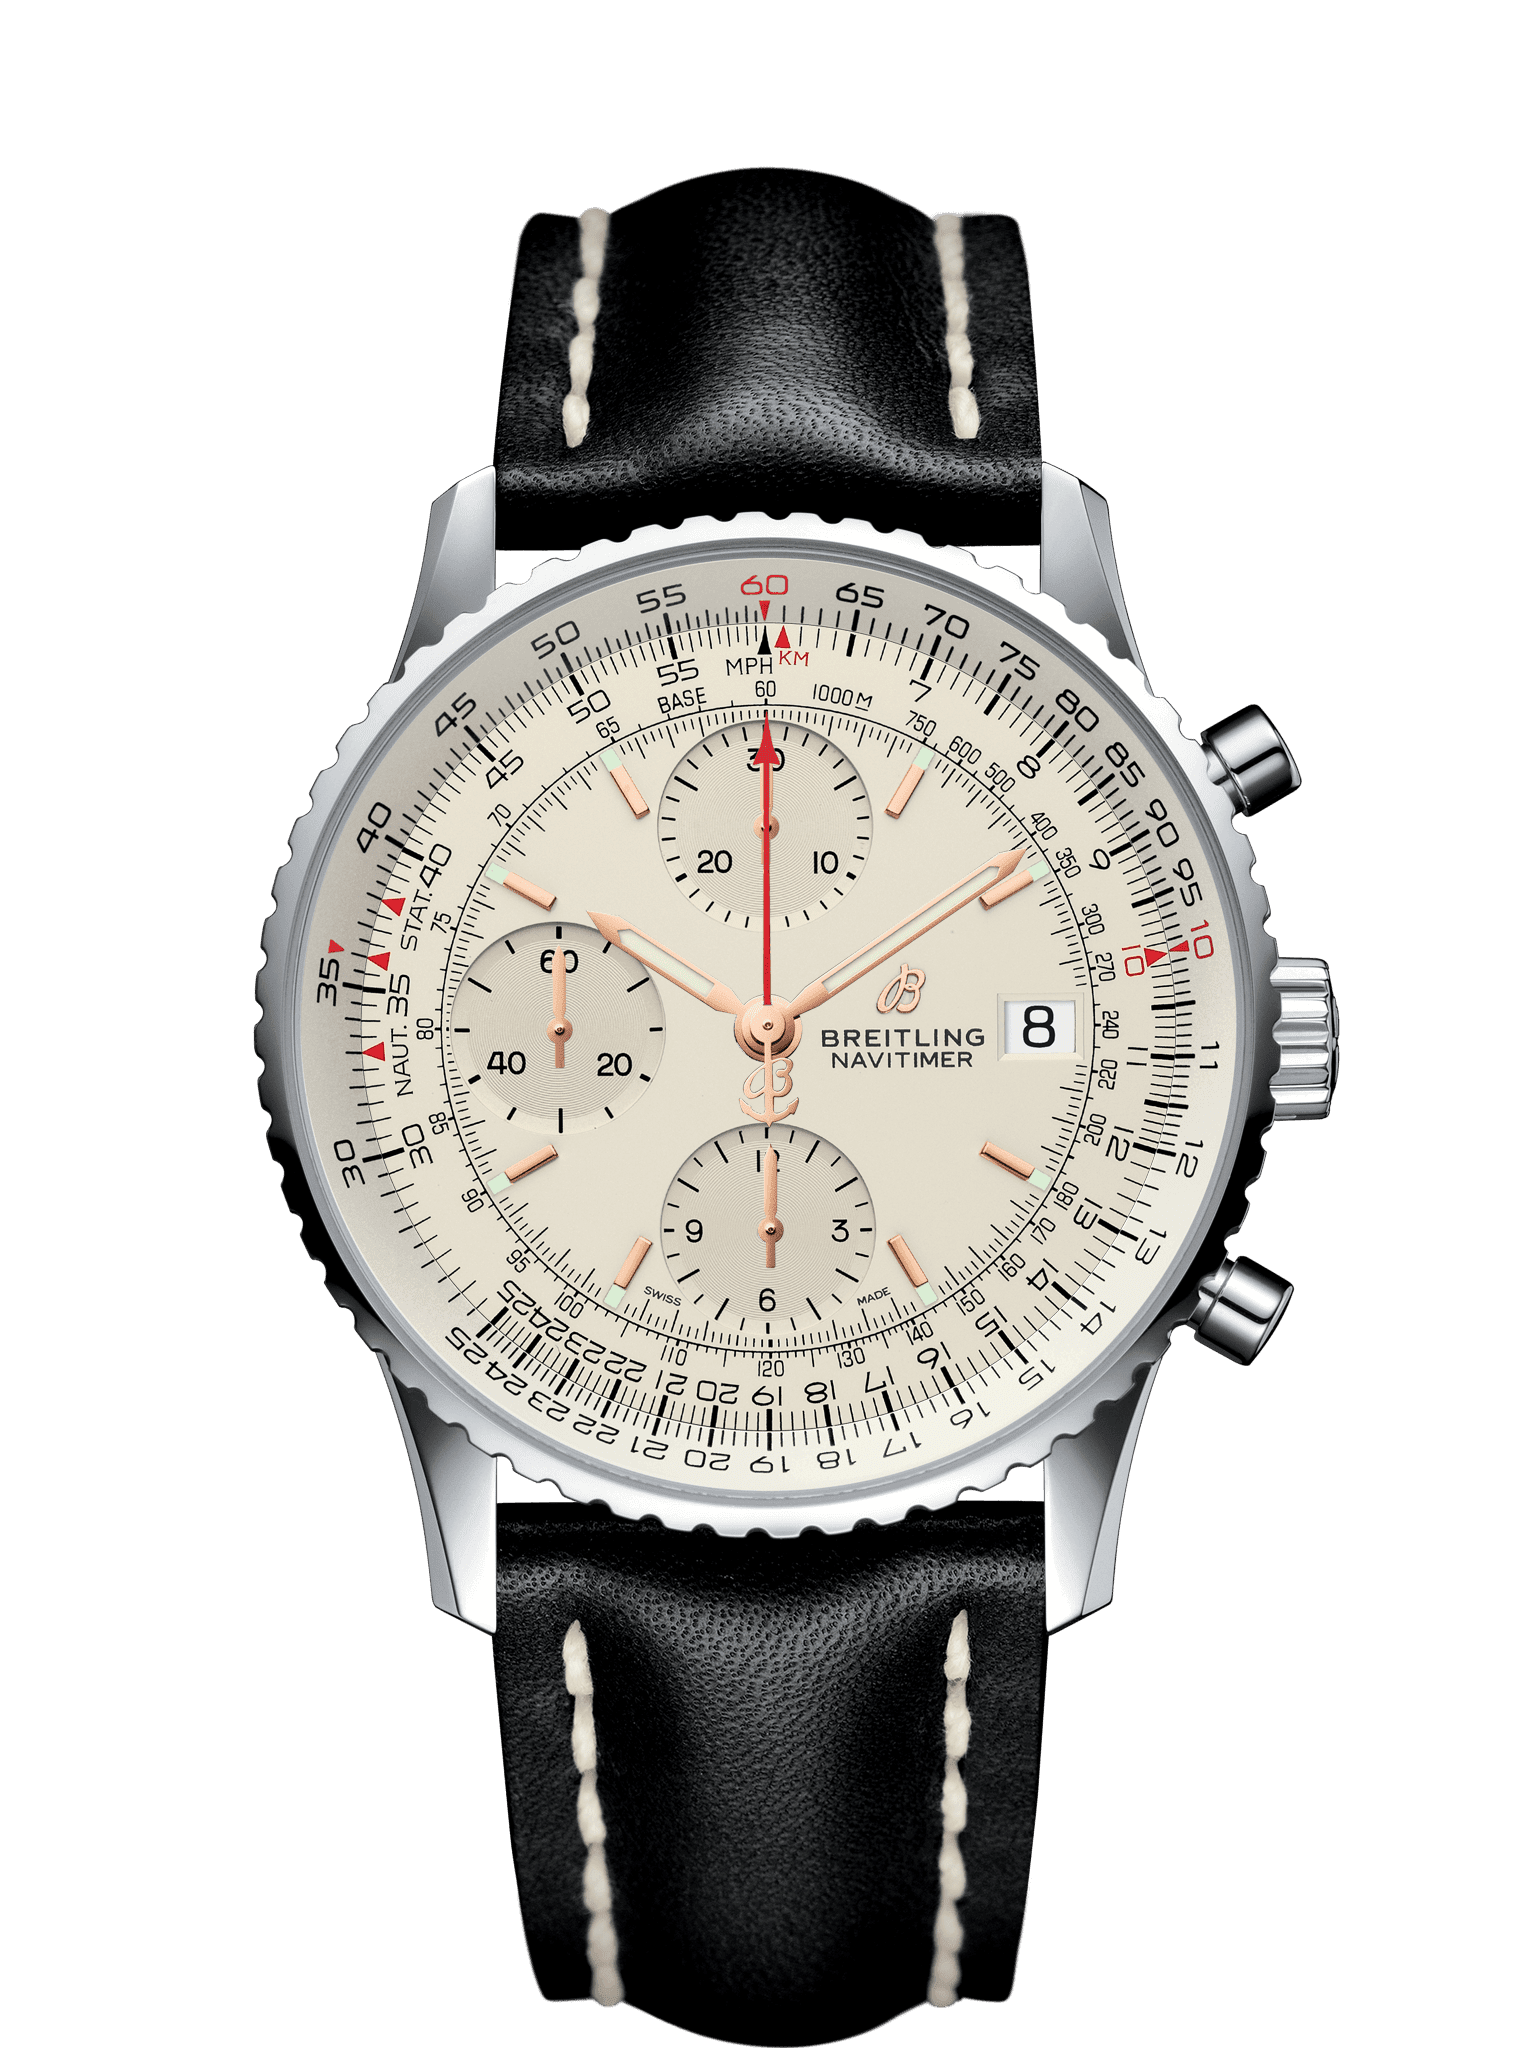 {breitling}Brettlin Brightlin AB01344A1C1A1 timer B01 42 Frechtri Corori World Limited 250 Watch Stainless Steel/SS MenBrettlin breitling AB0144 time cushion air 30th anniversary model watch stainless steel/leather lady